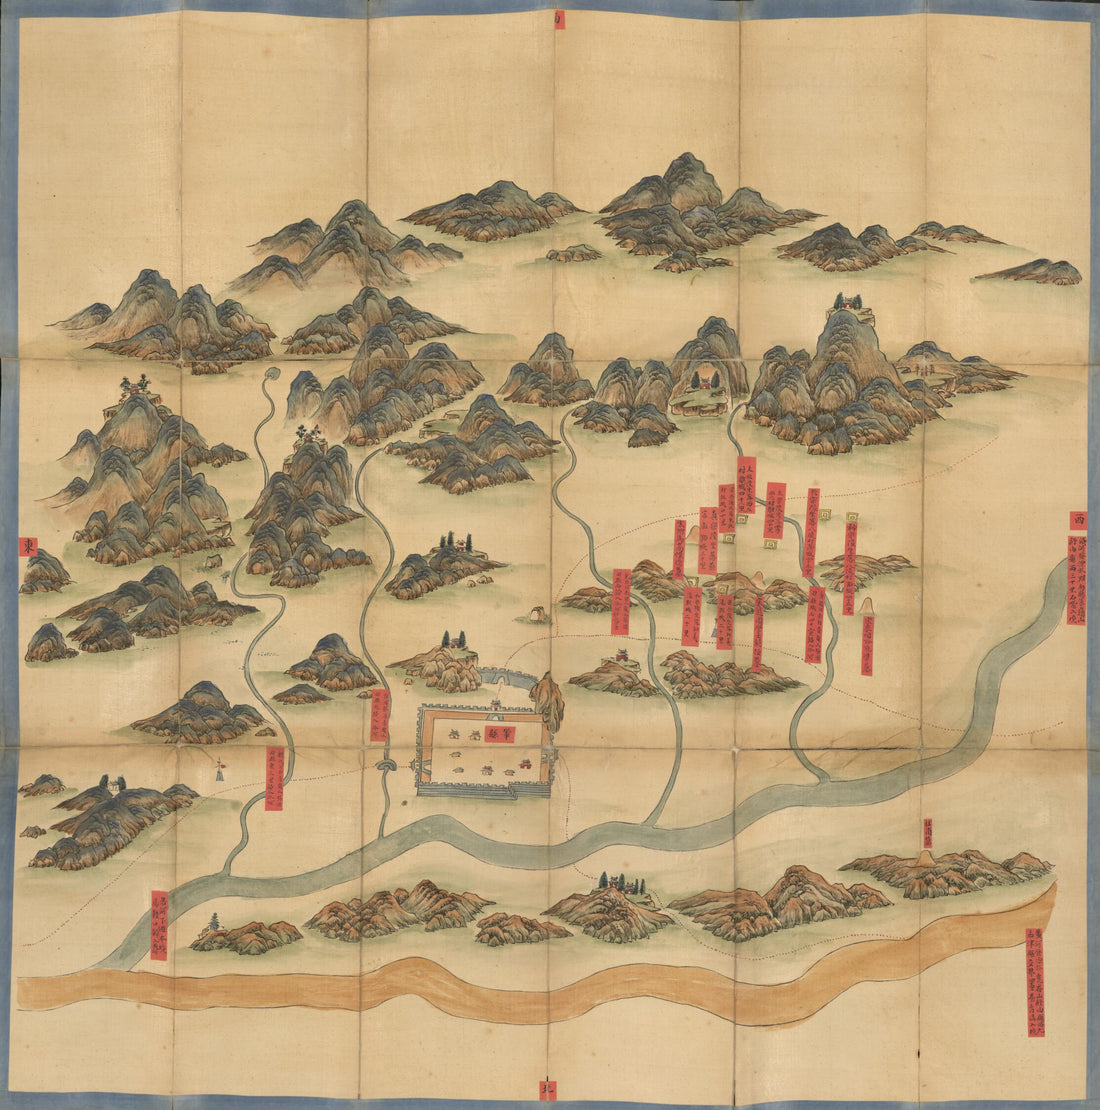 This old map of Gong Xian He Tu. (鞏縣河圖, Map of the River Systems In Gong County) from 1734 was created by Arthur W. (Arthur William) Hummel in 1734